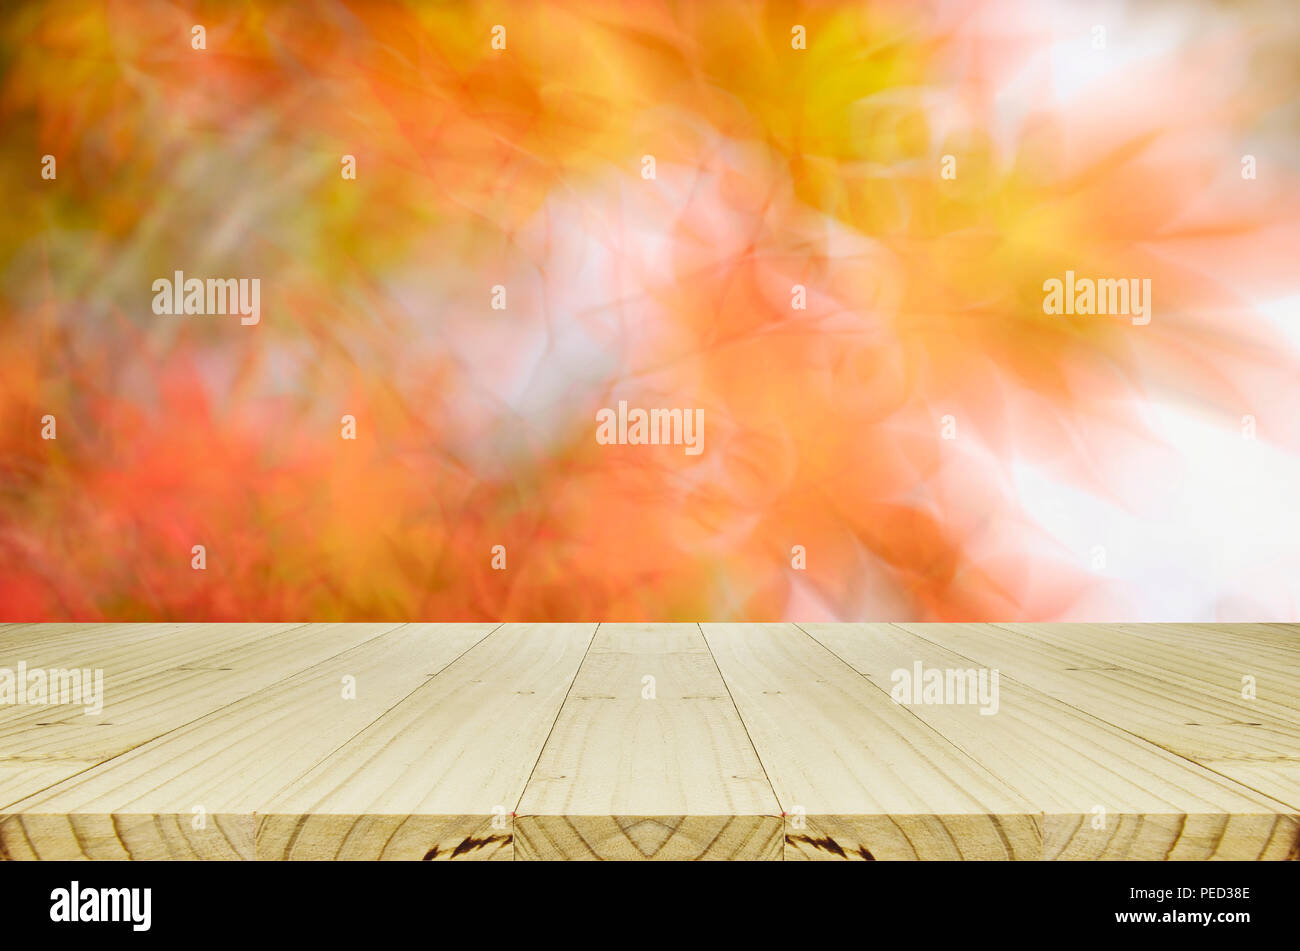 Pine wood counter with blurred autumn leaves background. Stock Photo